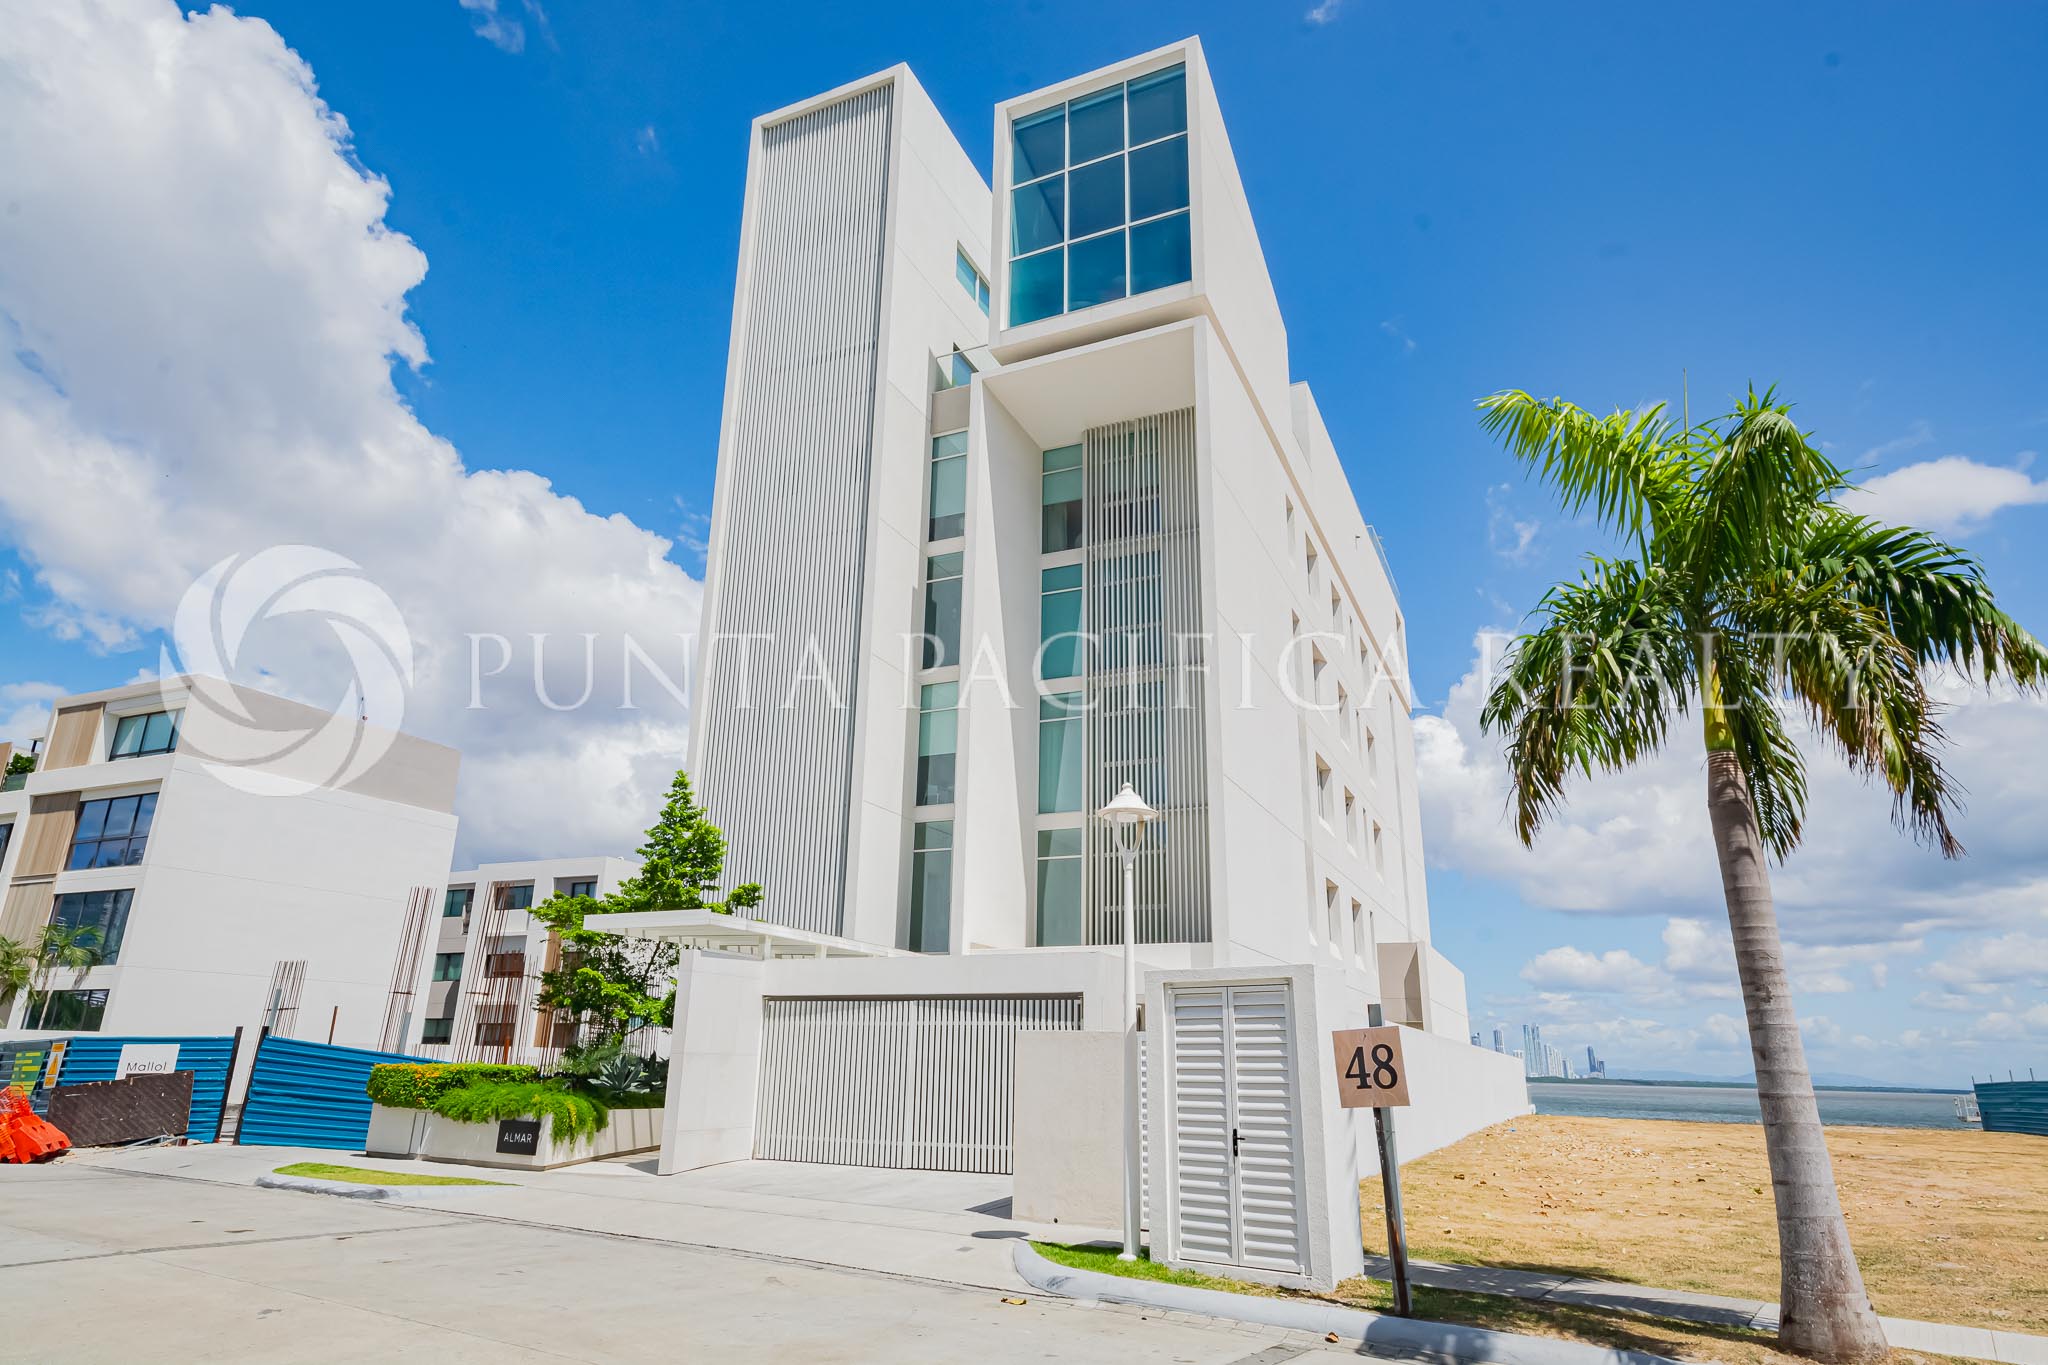 For Sale | 4-Bedroom Apartment | Luxurious Furnishings | Private Elevator Access | Exclusive Community (6 Families) | Almar Residences